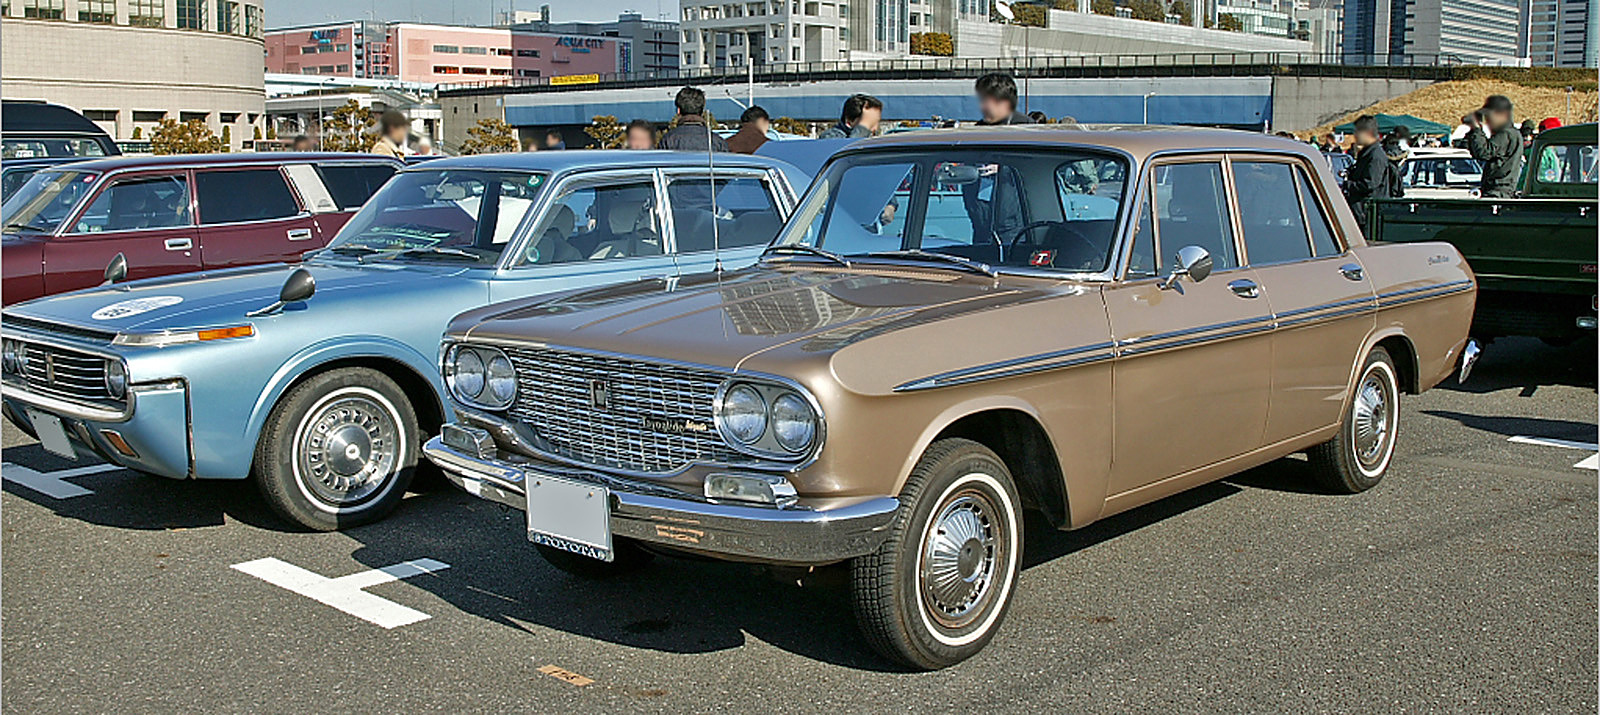 File:Toyopet Crown RS41 001.jpg - Wikimedia Commons